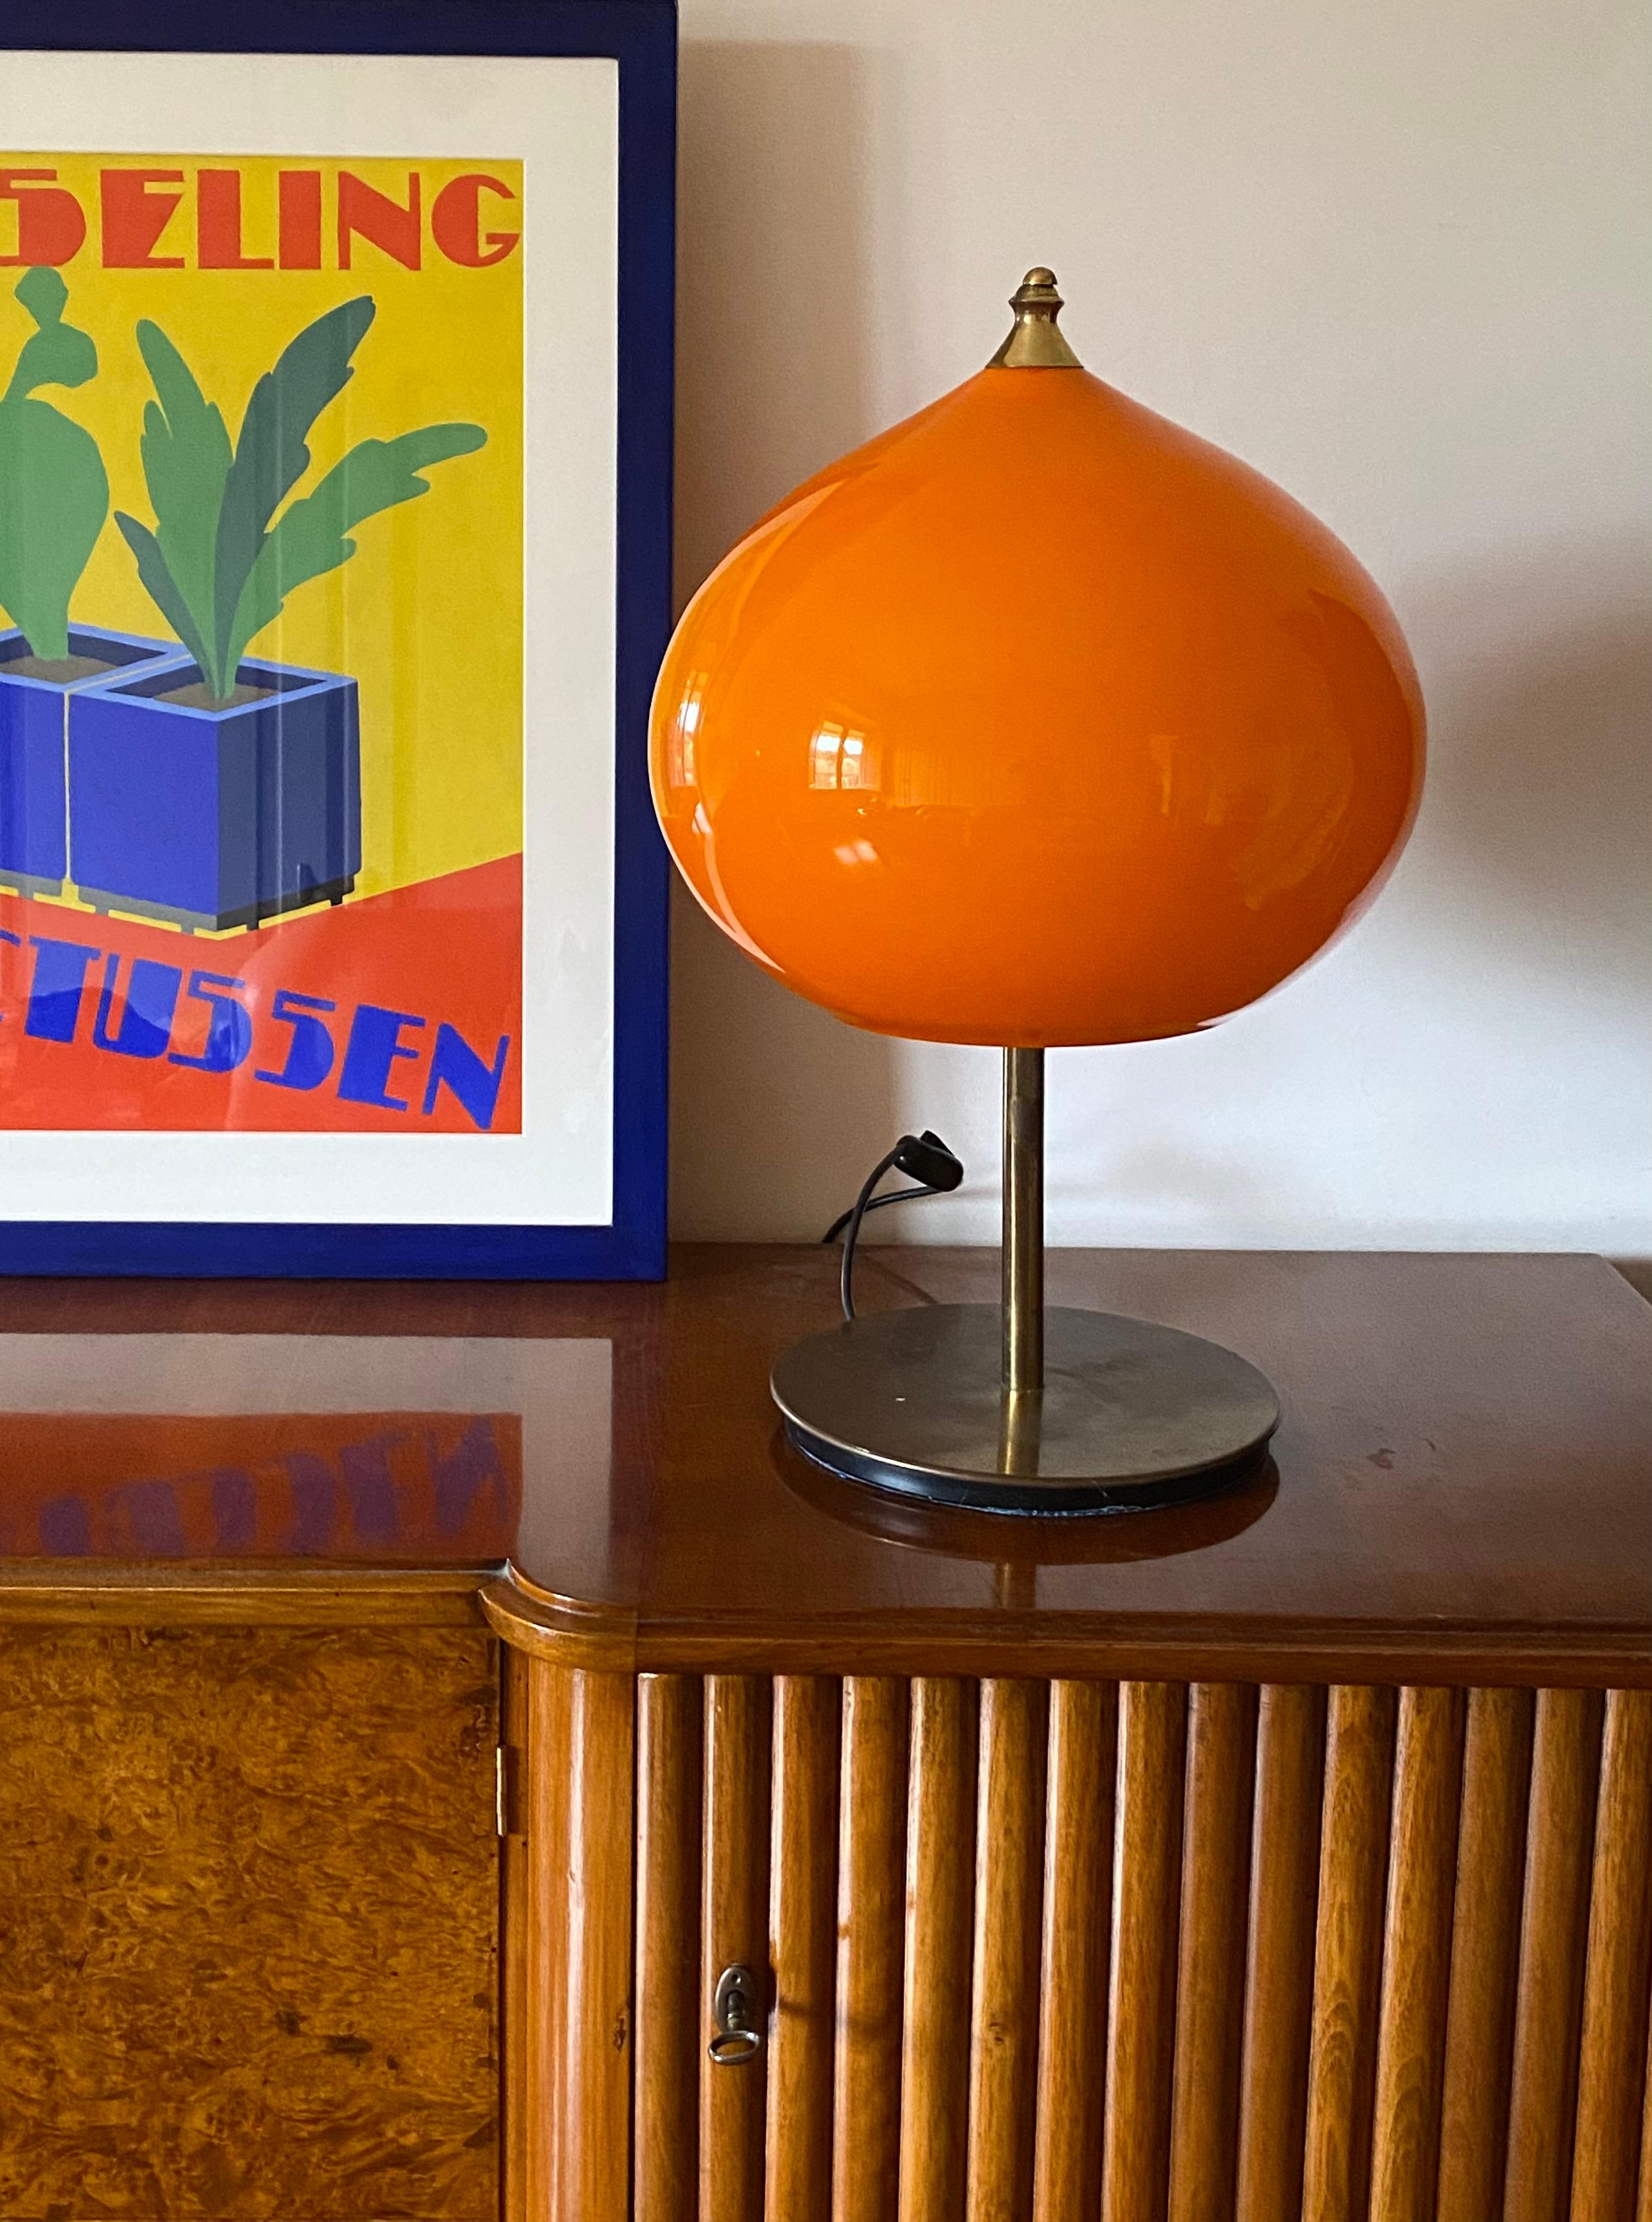 Modern monumental table lamp designed by Alessandro Pianon

Vistosi Italy, circa 1960s

Orange Murano onion shaped glass 

brass rod and base

53 cm H - diam. 27 cm

Triple bulbs. European plug.

Conditions: excellent, no defects